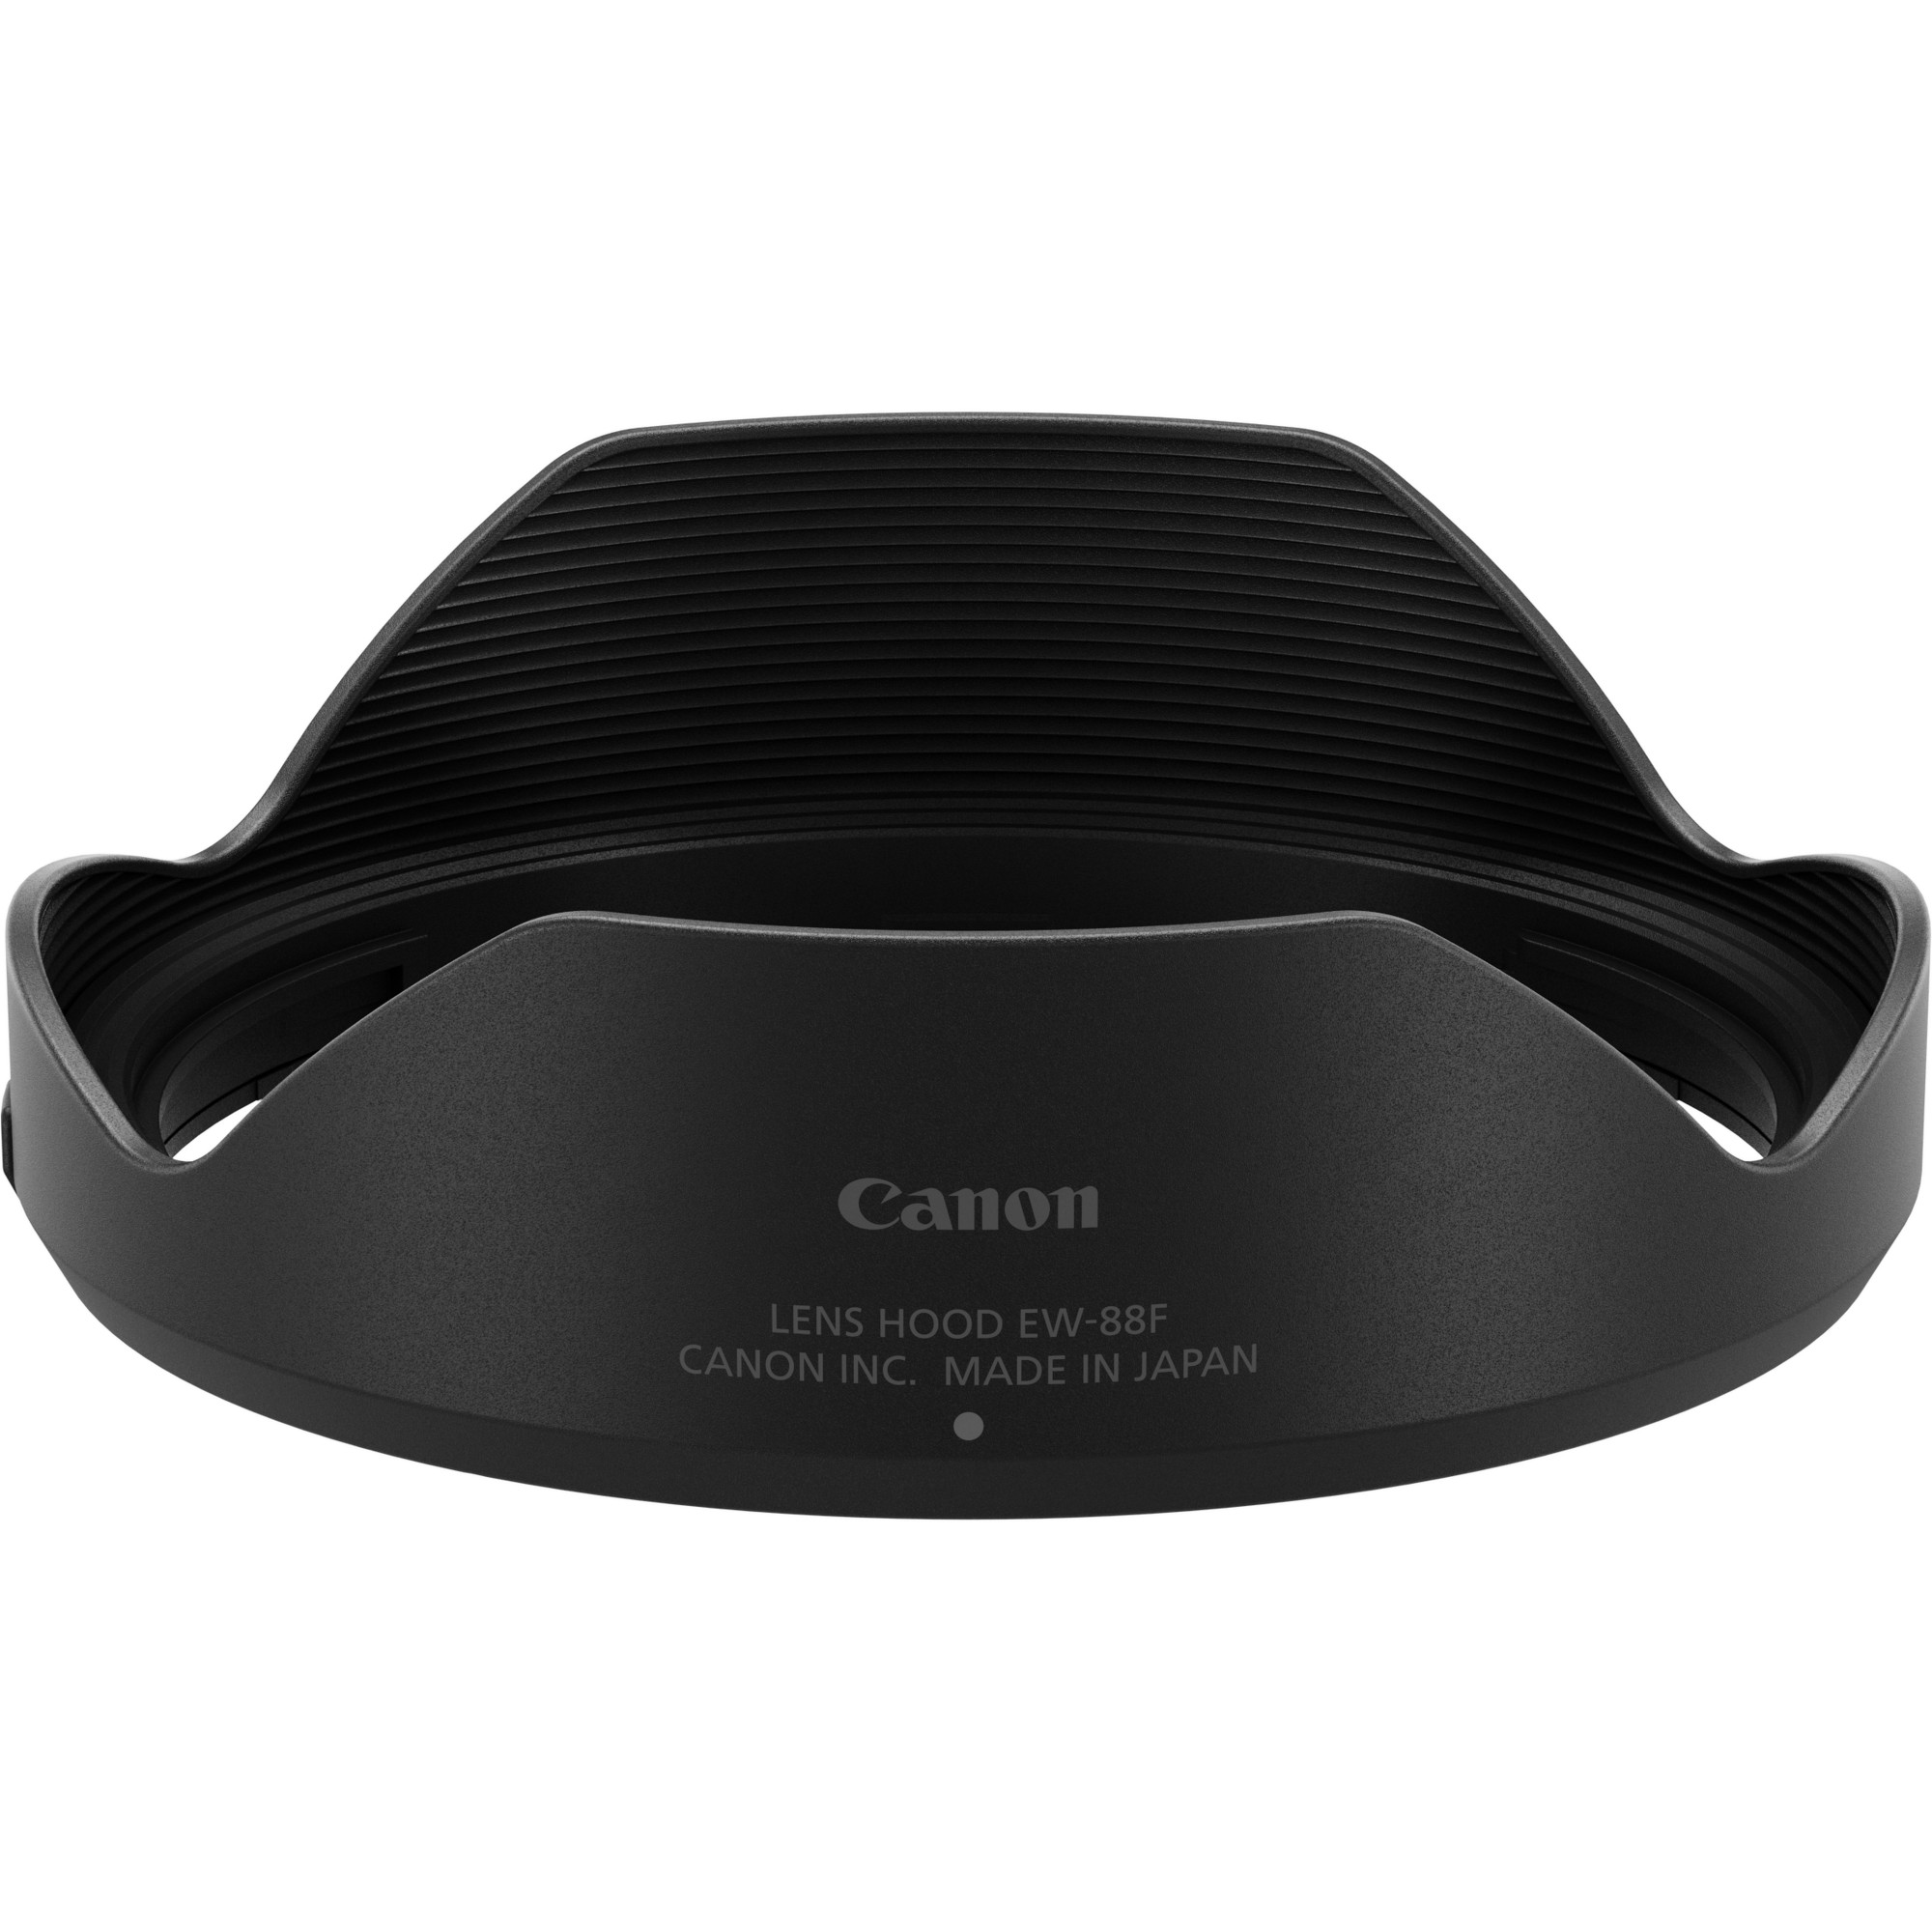 Photos - Other photo accessories Canon EW-88F Lens Hood 3683C001 